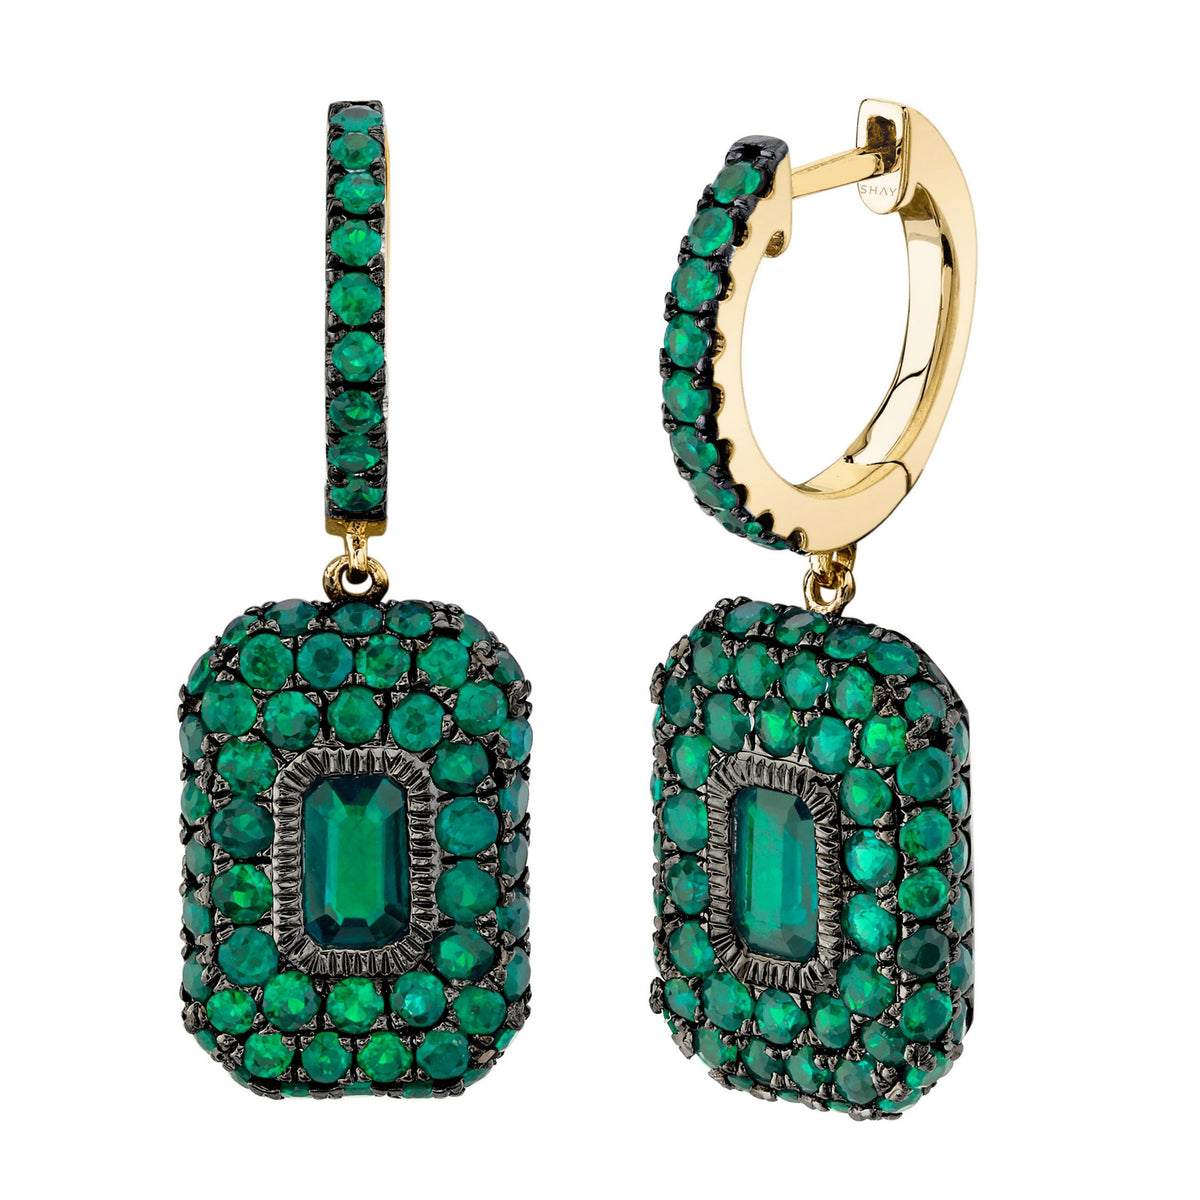 READY TO SHIP EMERALD PAVE BAGUETTE DROP EARRINGS